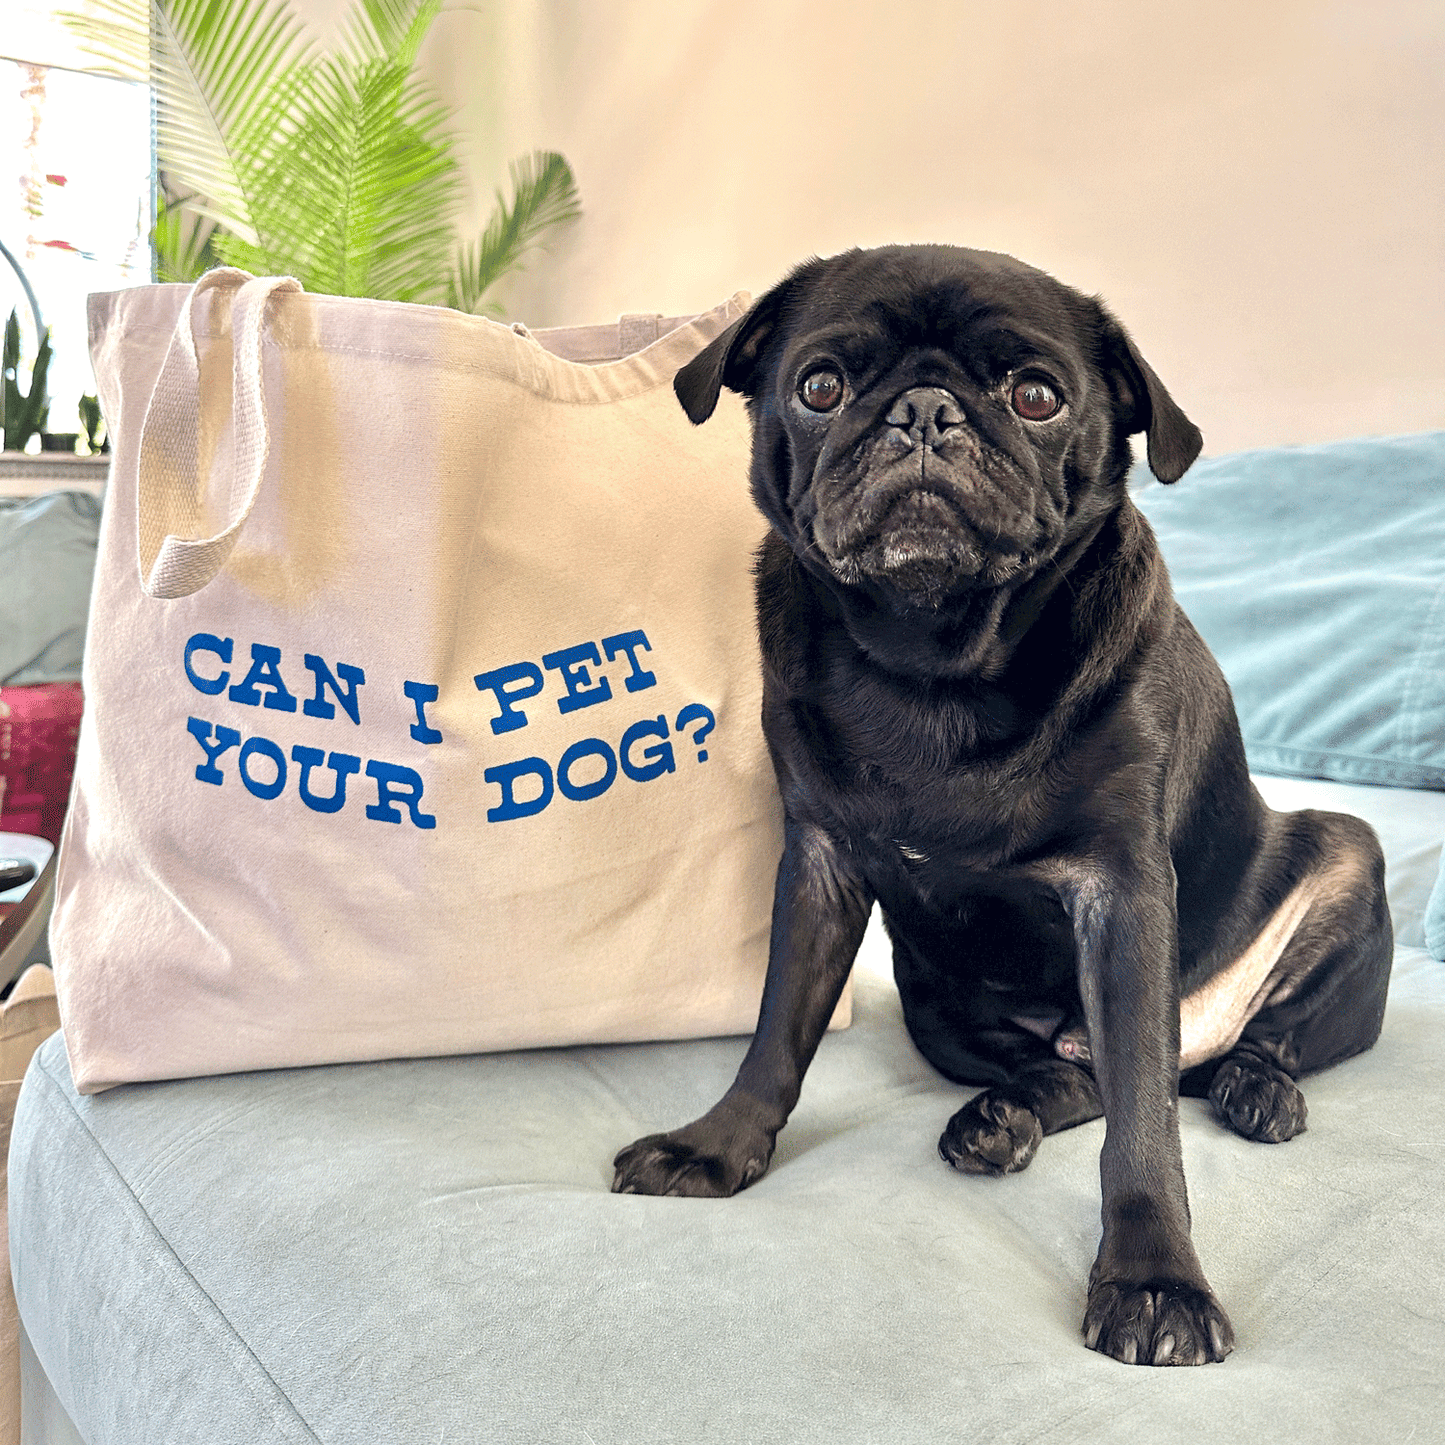 Large natural canvas colored tote bag sits on a blue couch next to a black pug dog.  "CAN I PET YOUR DOG?" is printed on the side of the tote in blue.